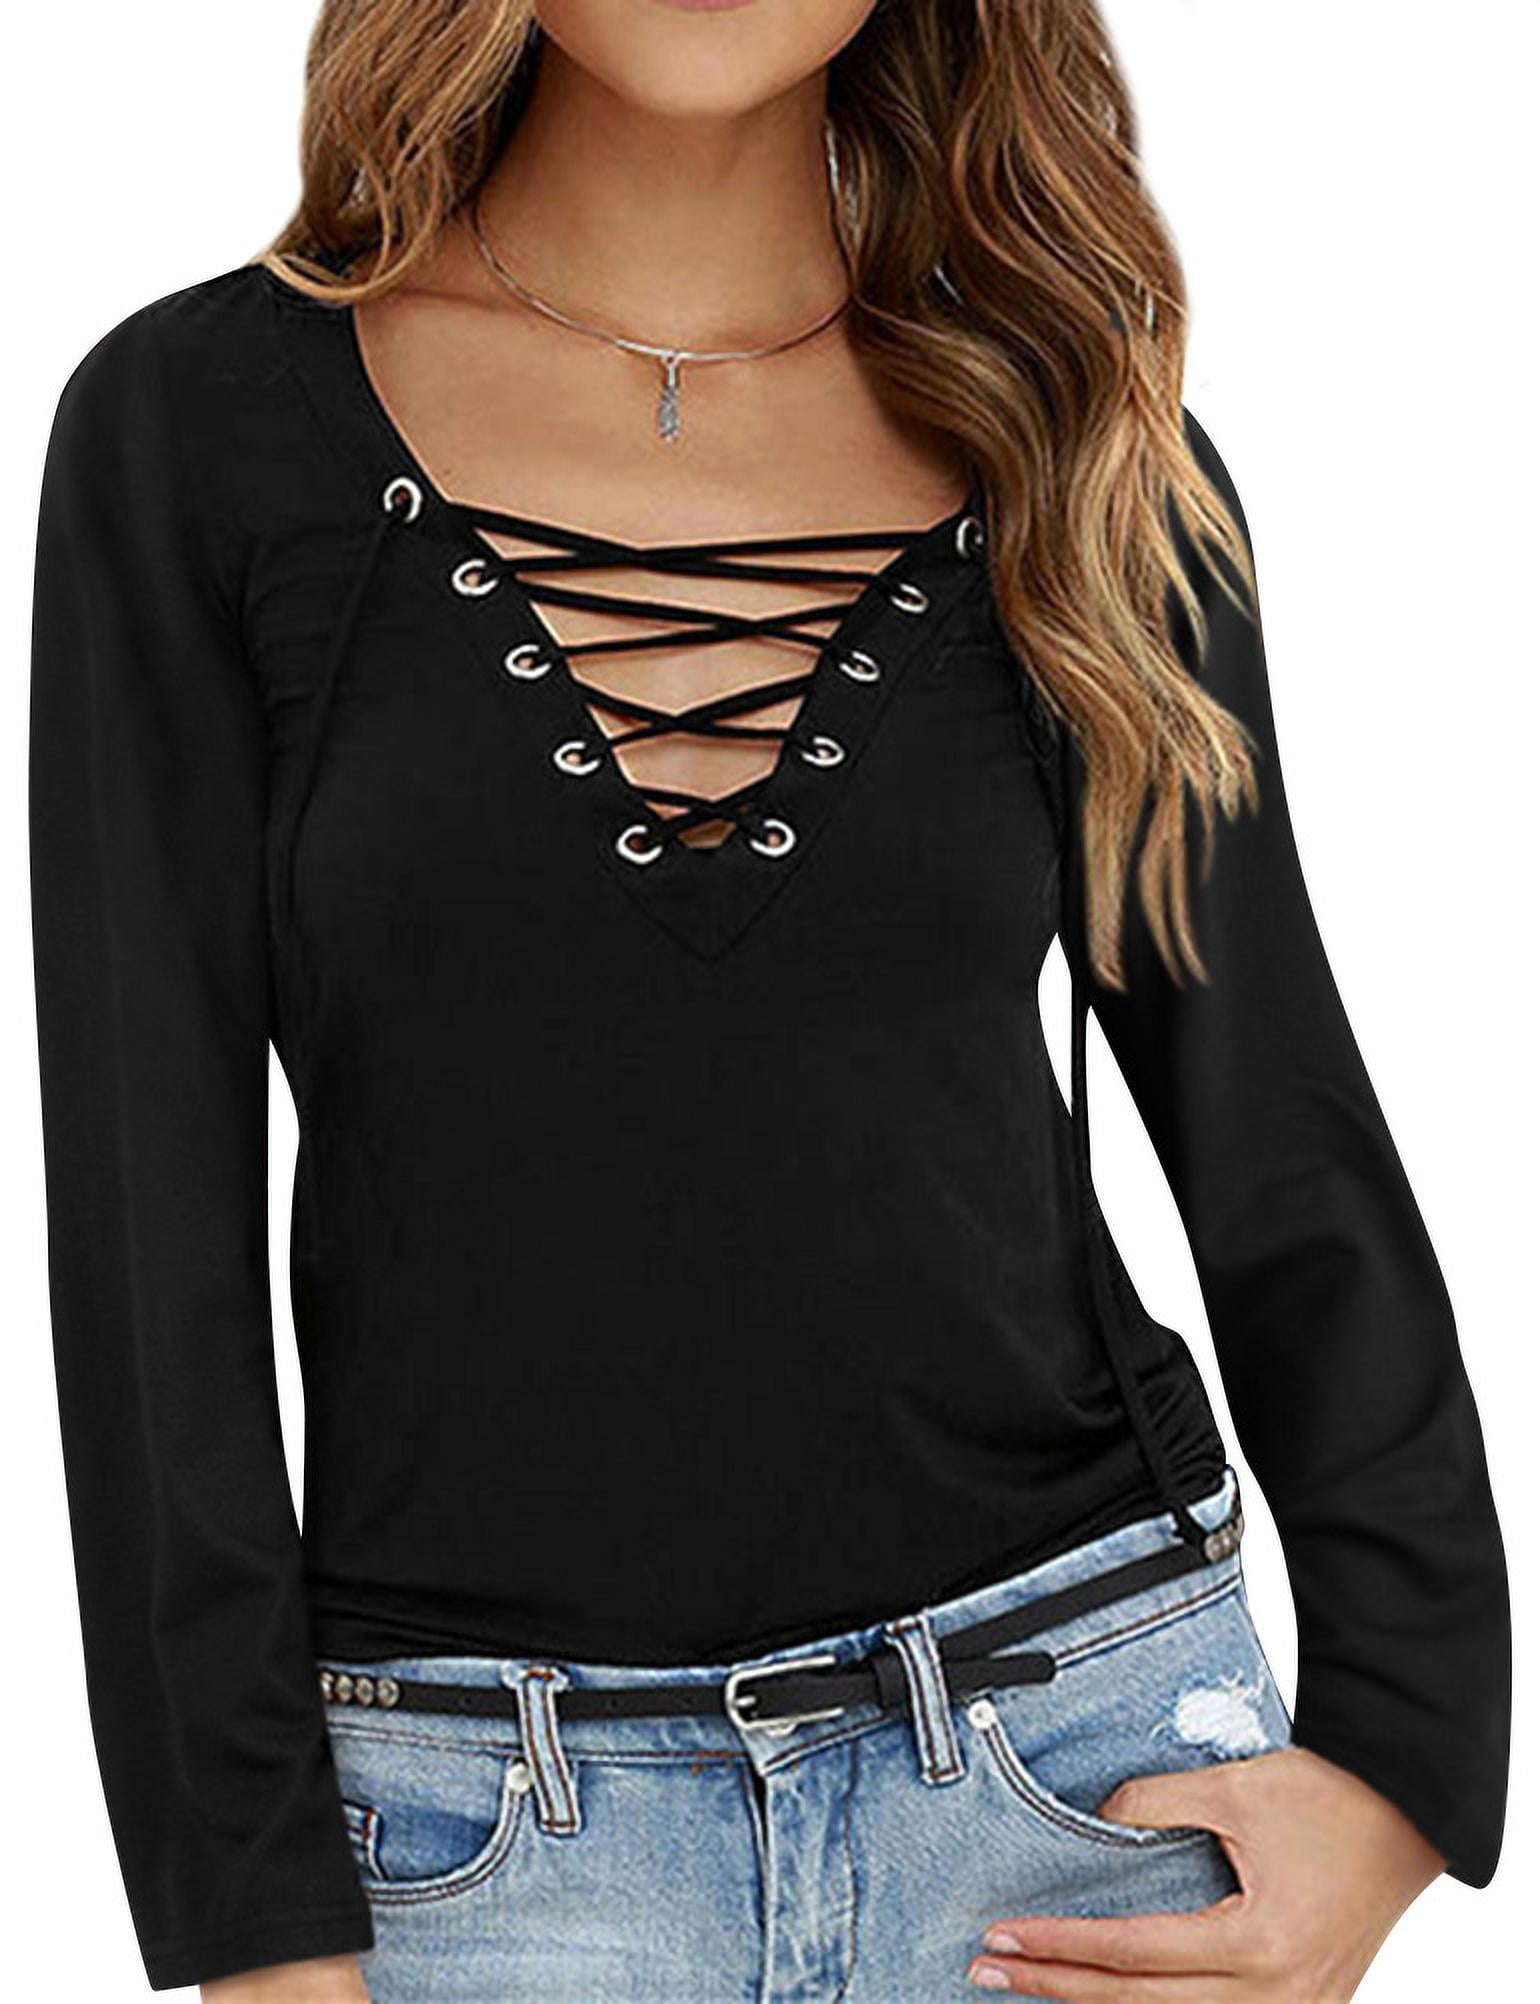 Women Spring Basic Top Casual Long Sleeve Color Block T Shirt Lace Up V-Neck Blouse WYTong Clearance